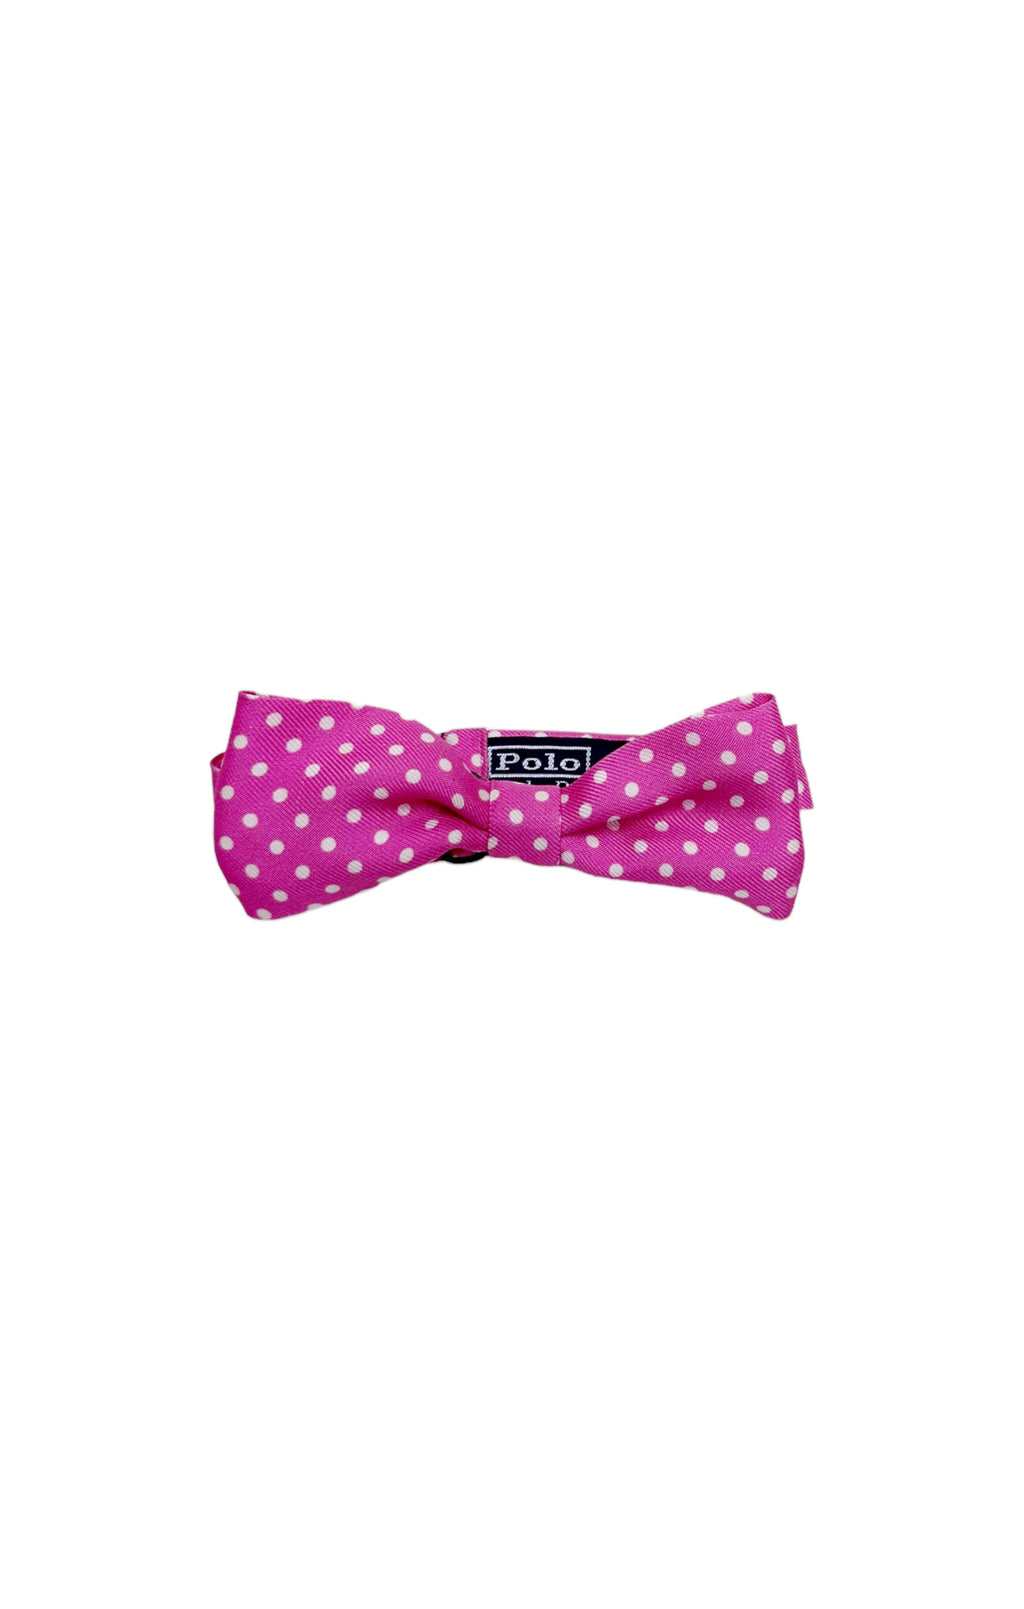 POLO BY RALPH LAUREN Bow Tie Size: 11"-14"